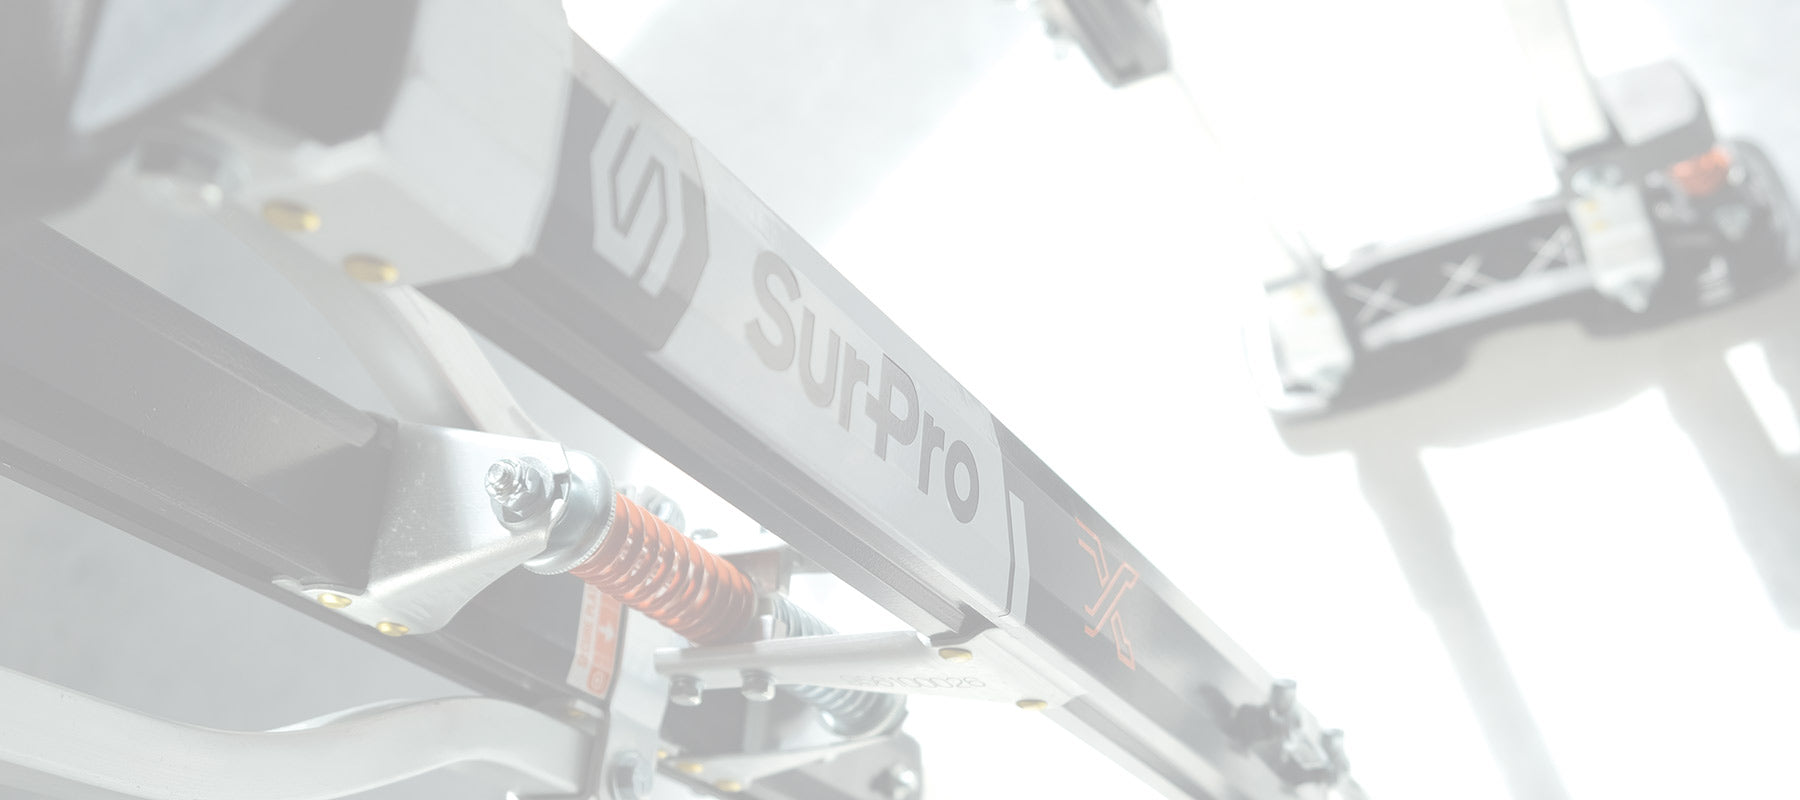 SurPro Stilts is powered by our passion for drywall stilts